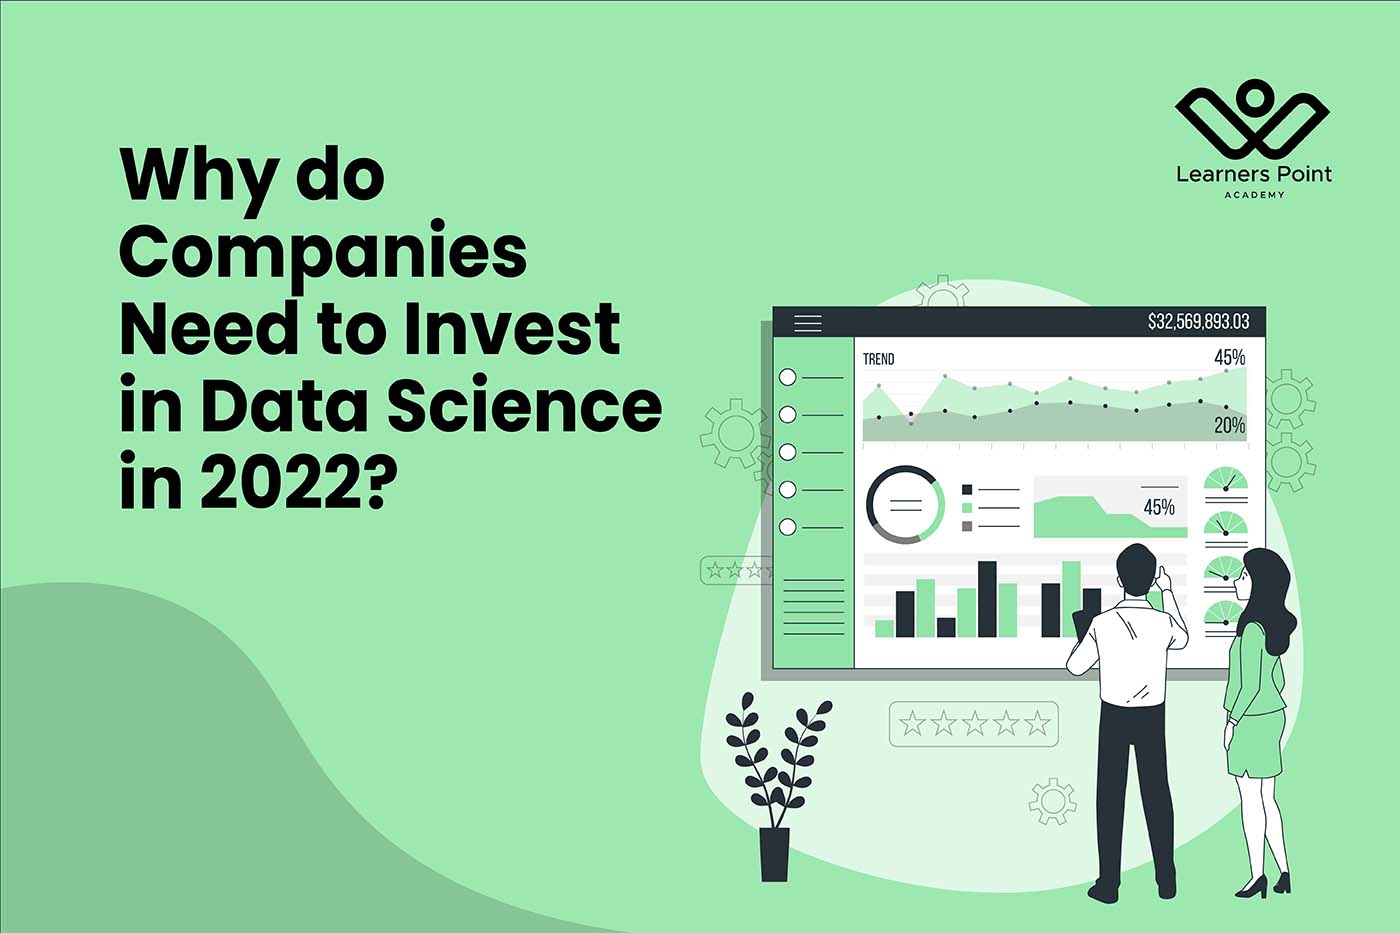 Why do Companies Need to Invest in Data Science in 2022?